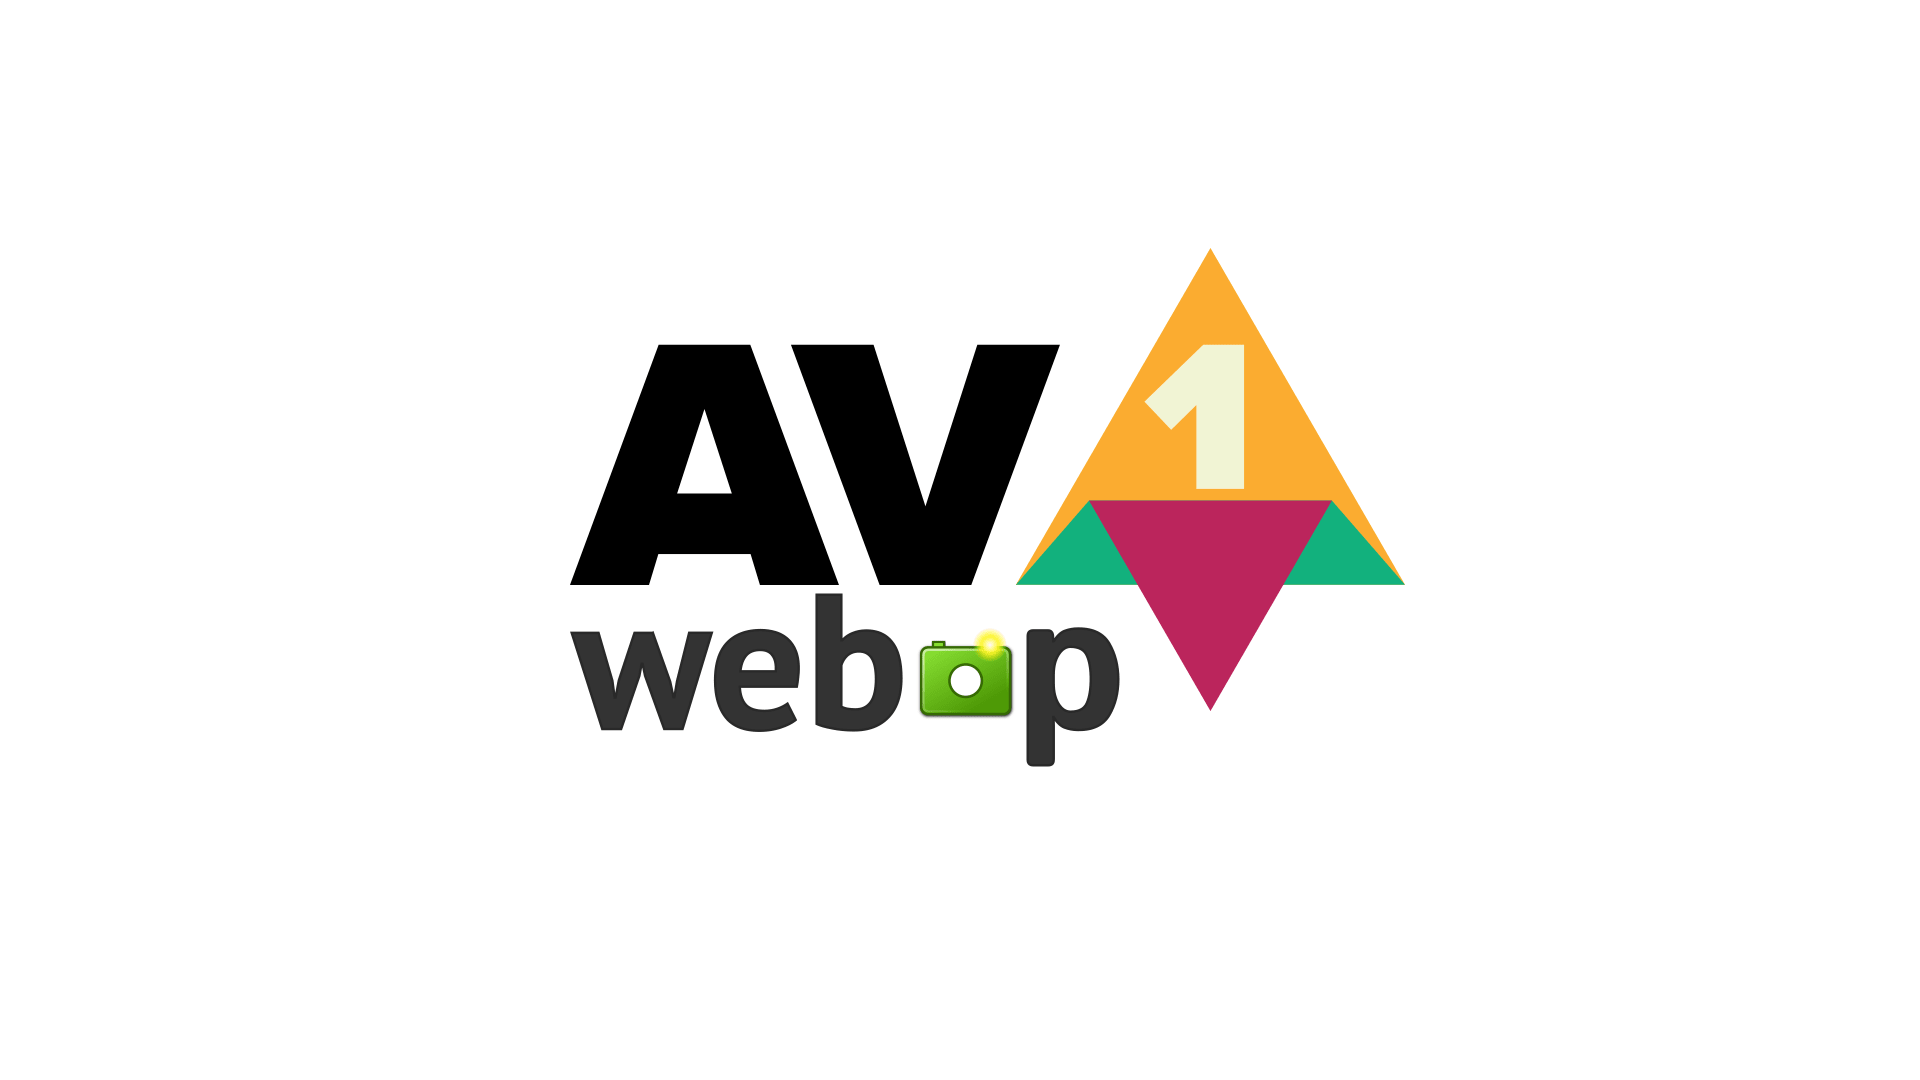 Not so fast with AVIF, WebP is still the way